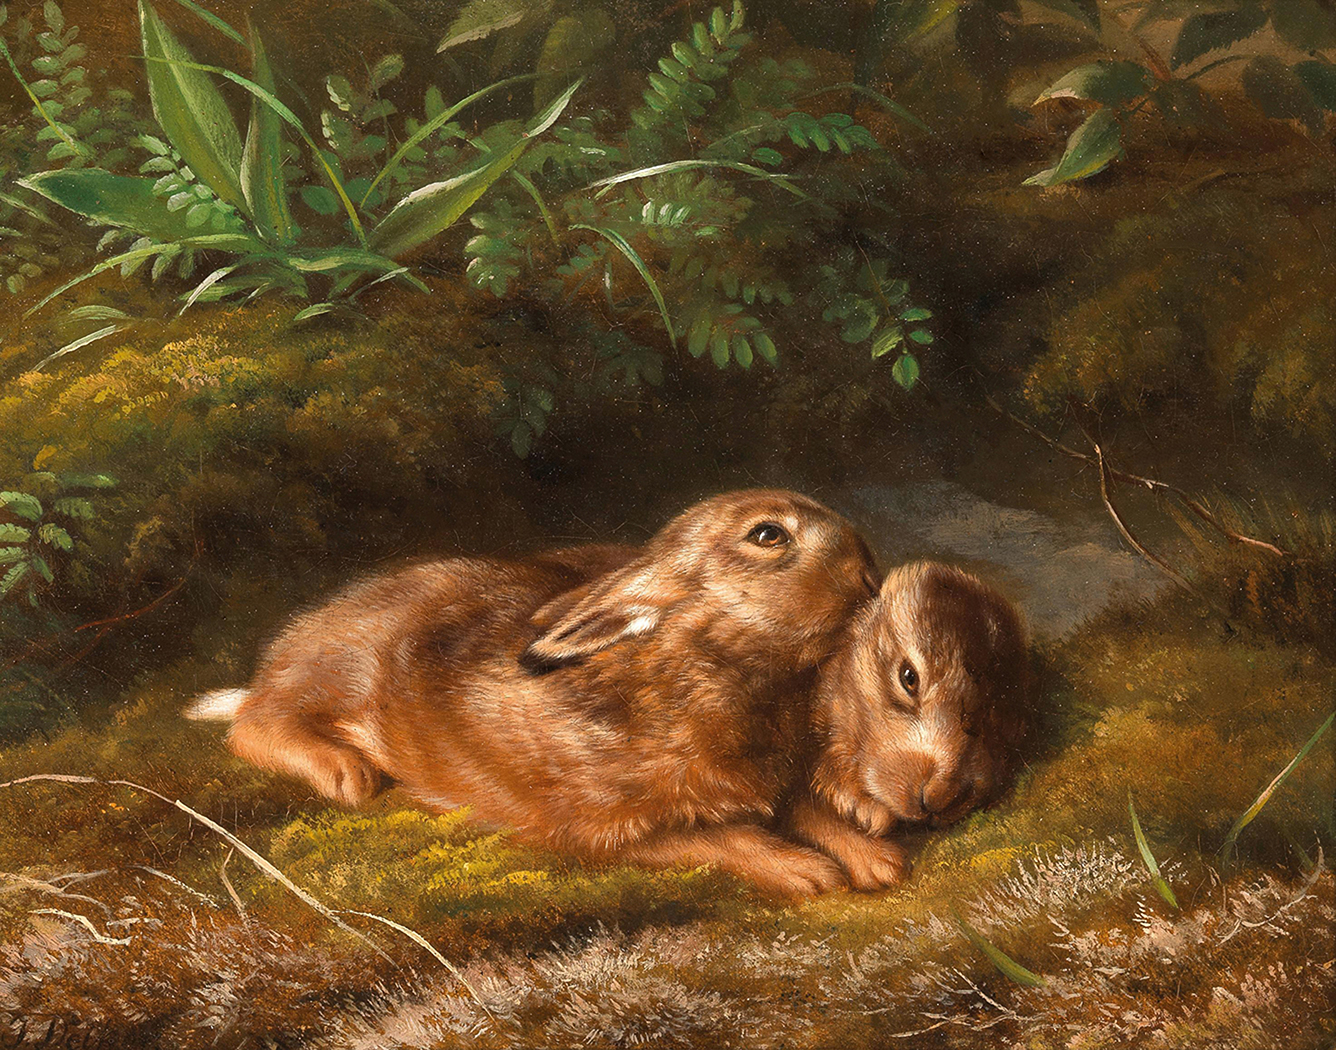 Two Rabbits Oil Painting Print on Canv ...